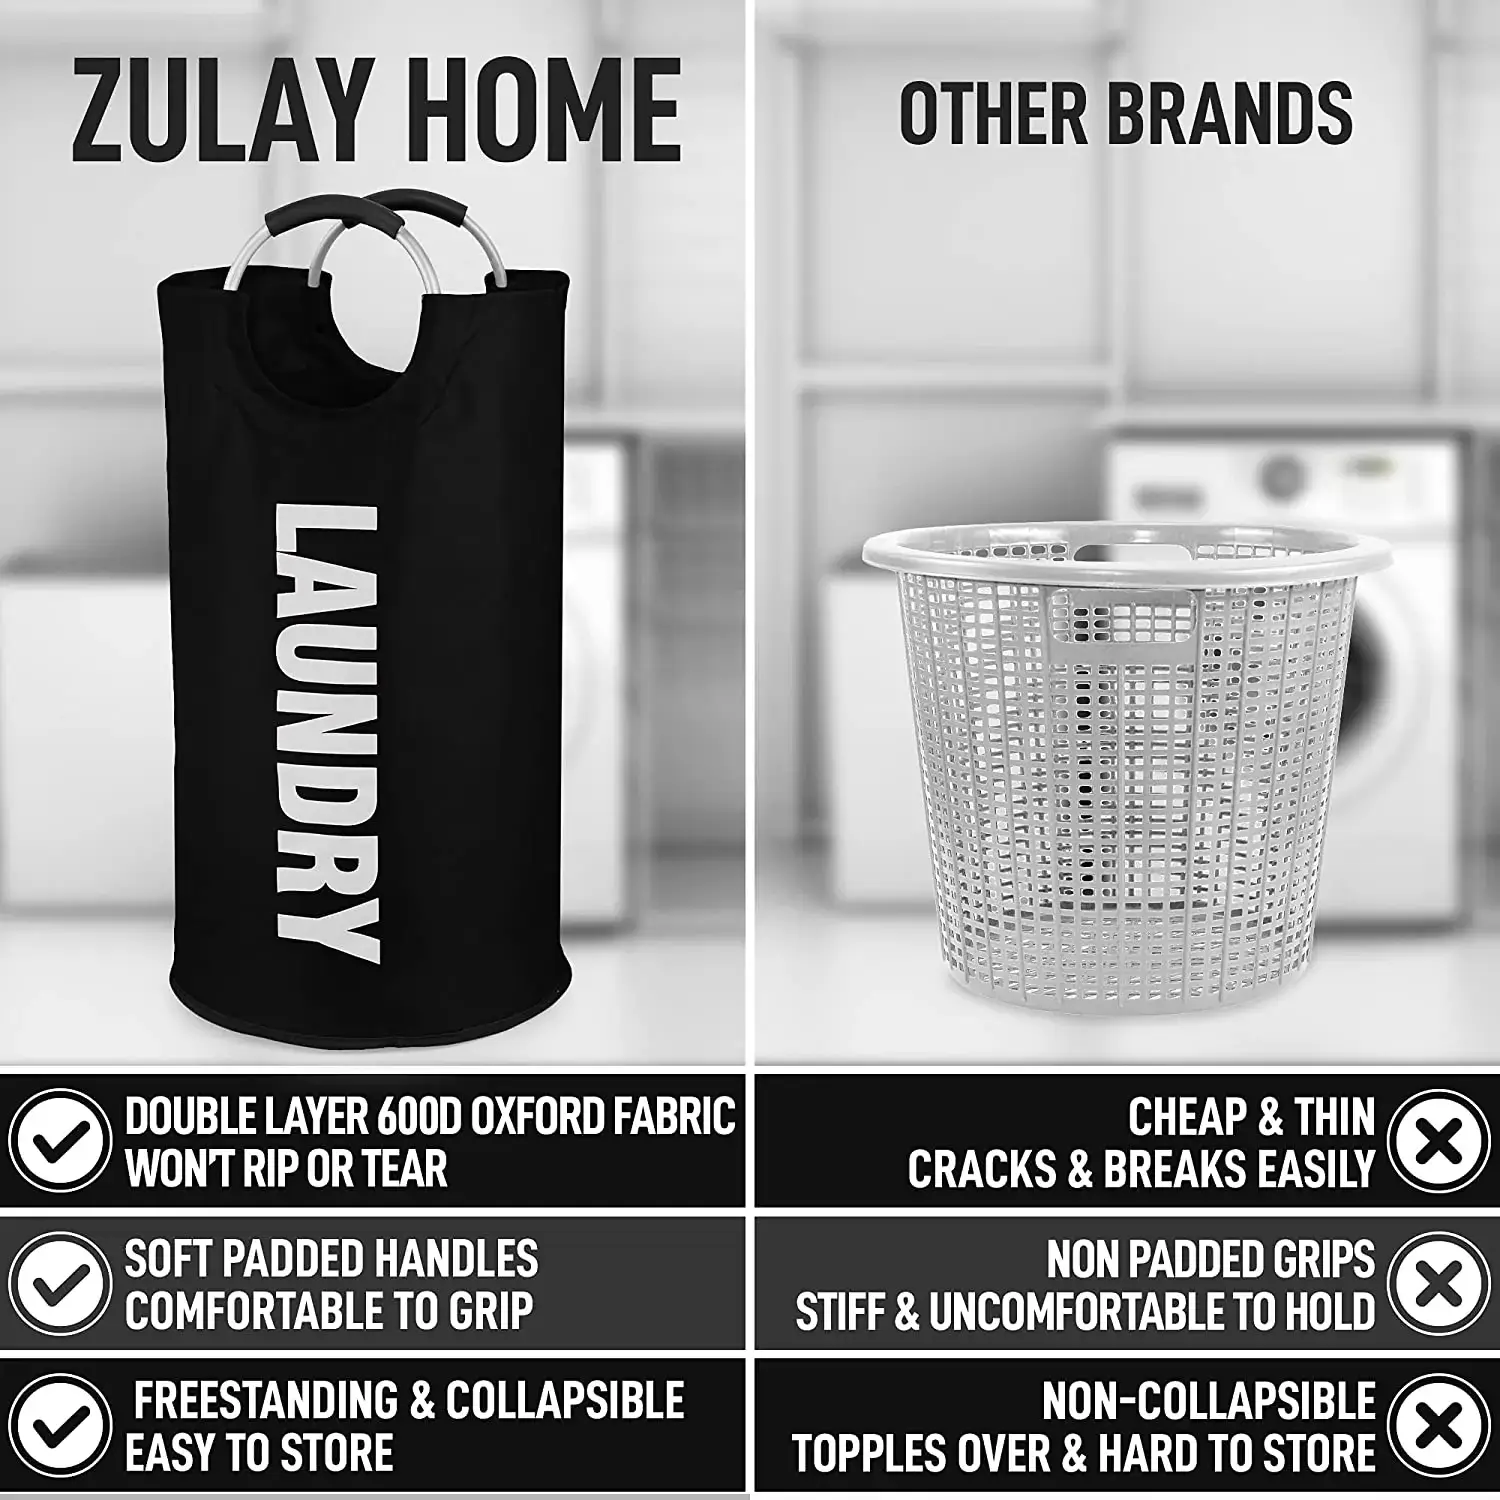 Zulay Home Laundry Basket Collapsible With Handles